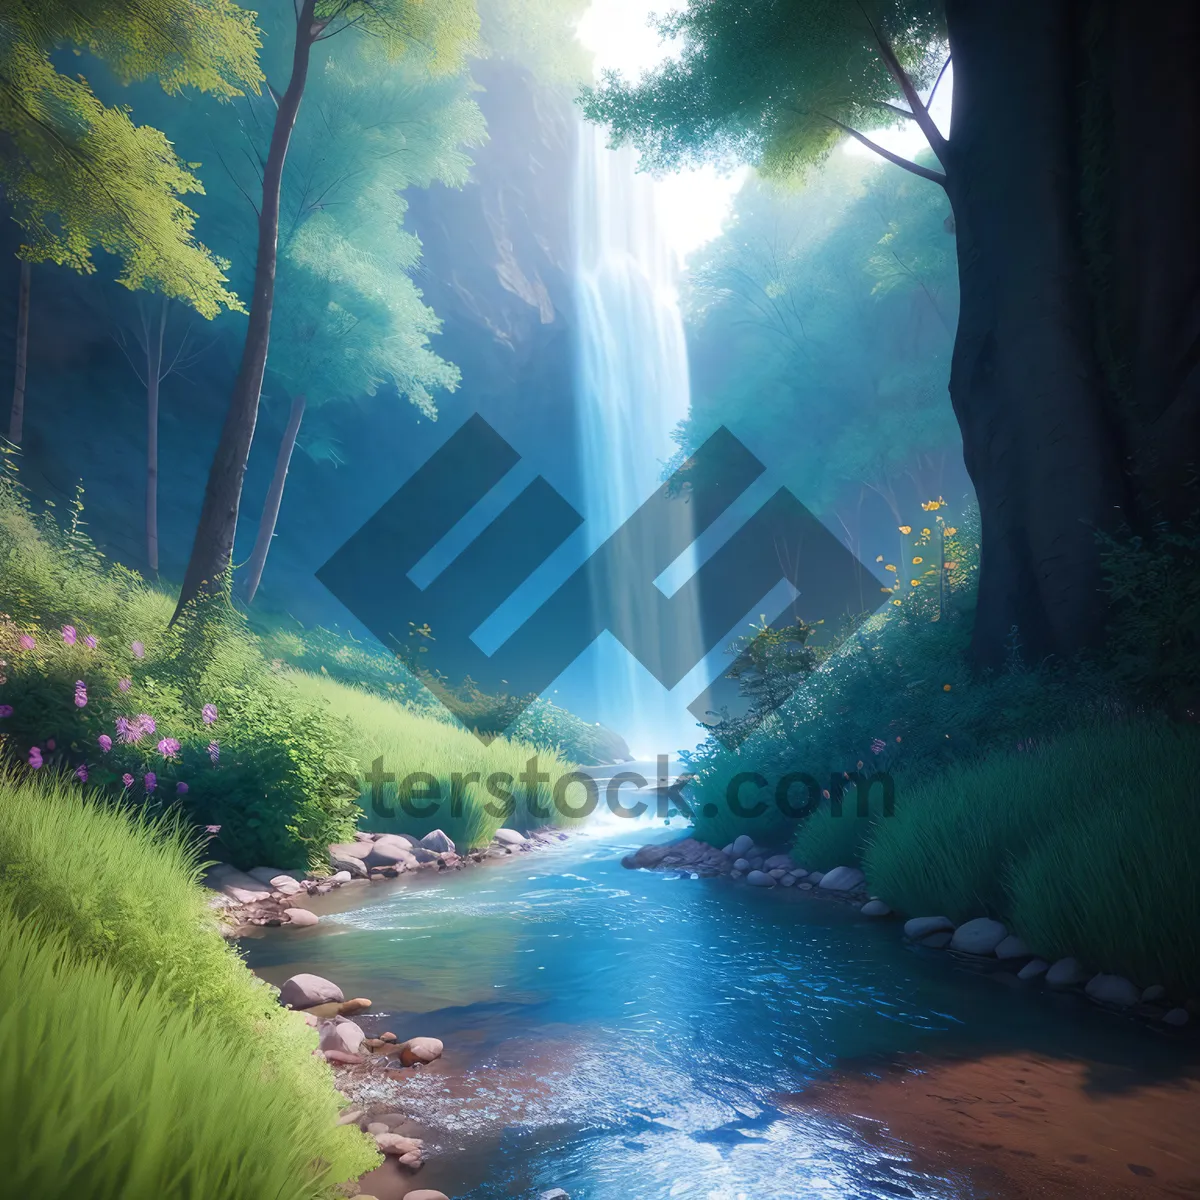 Picture of Serene Cascading River in Lush Forest Landscape